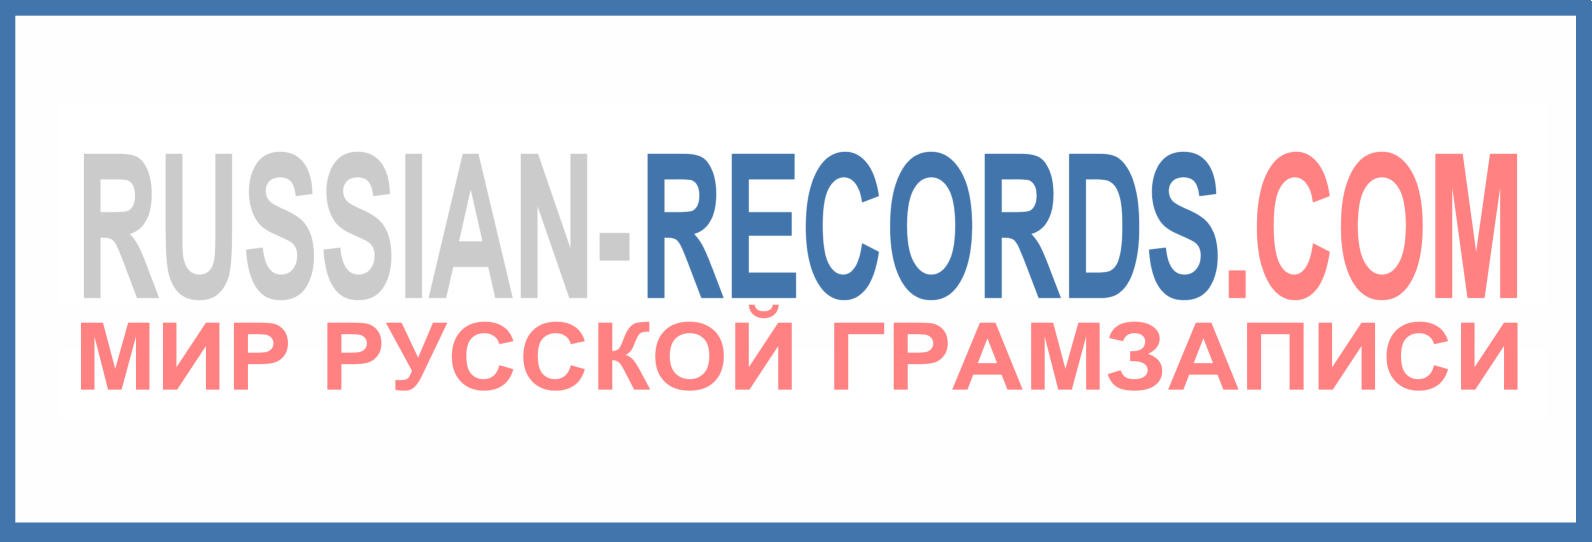 The World of Russian Records